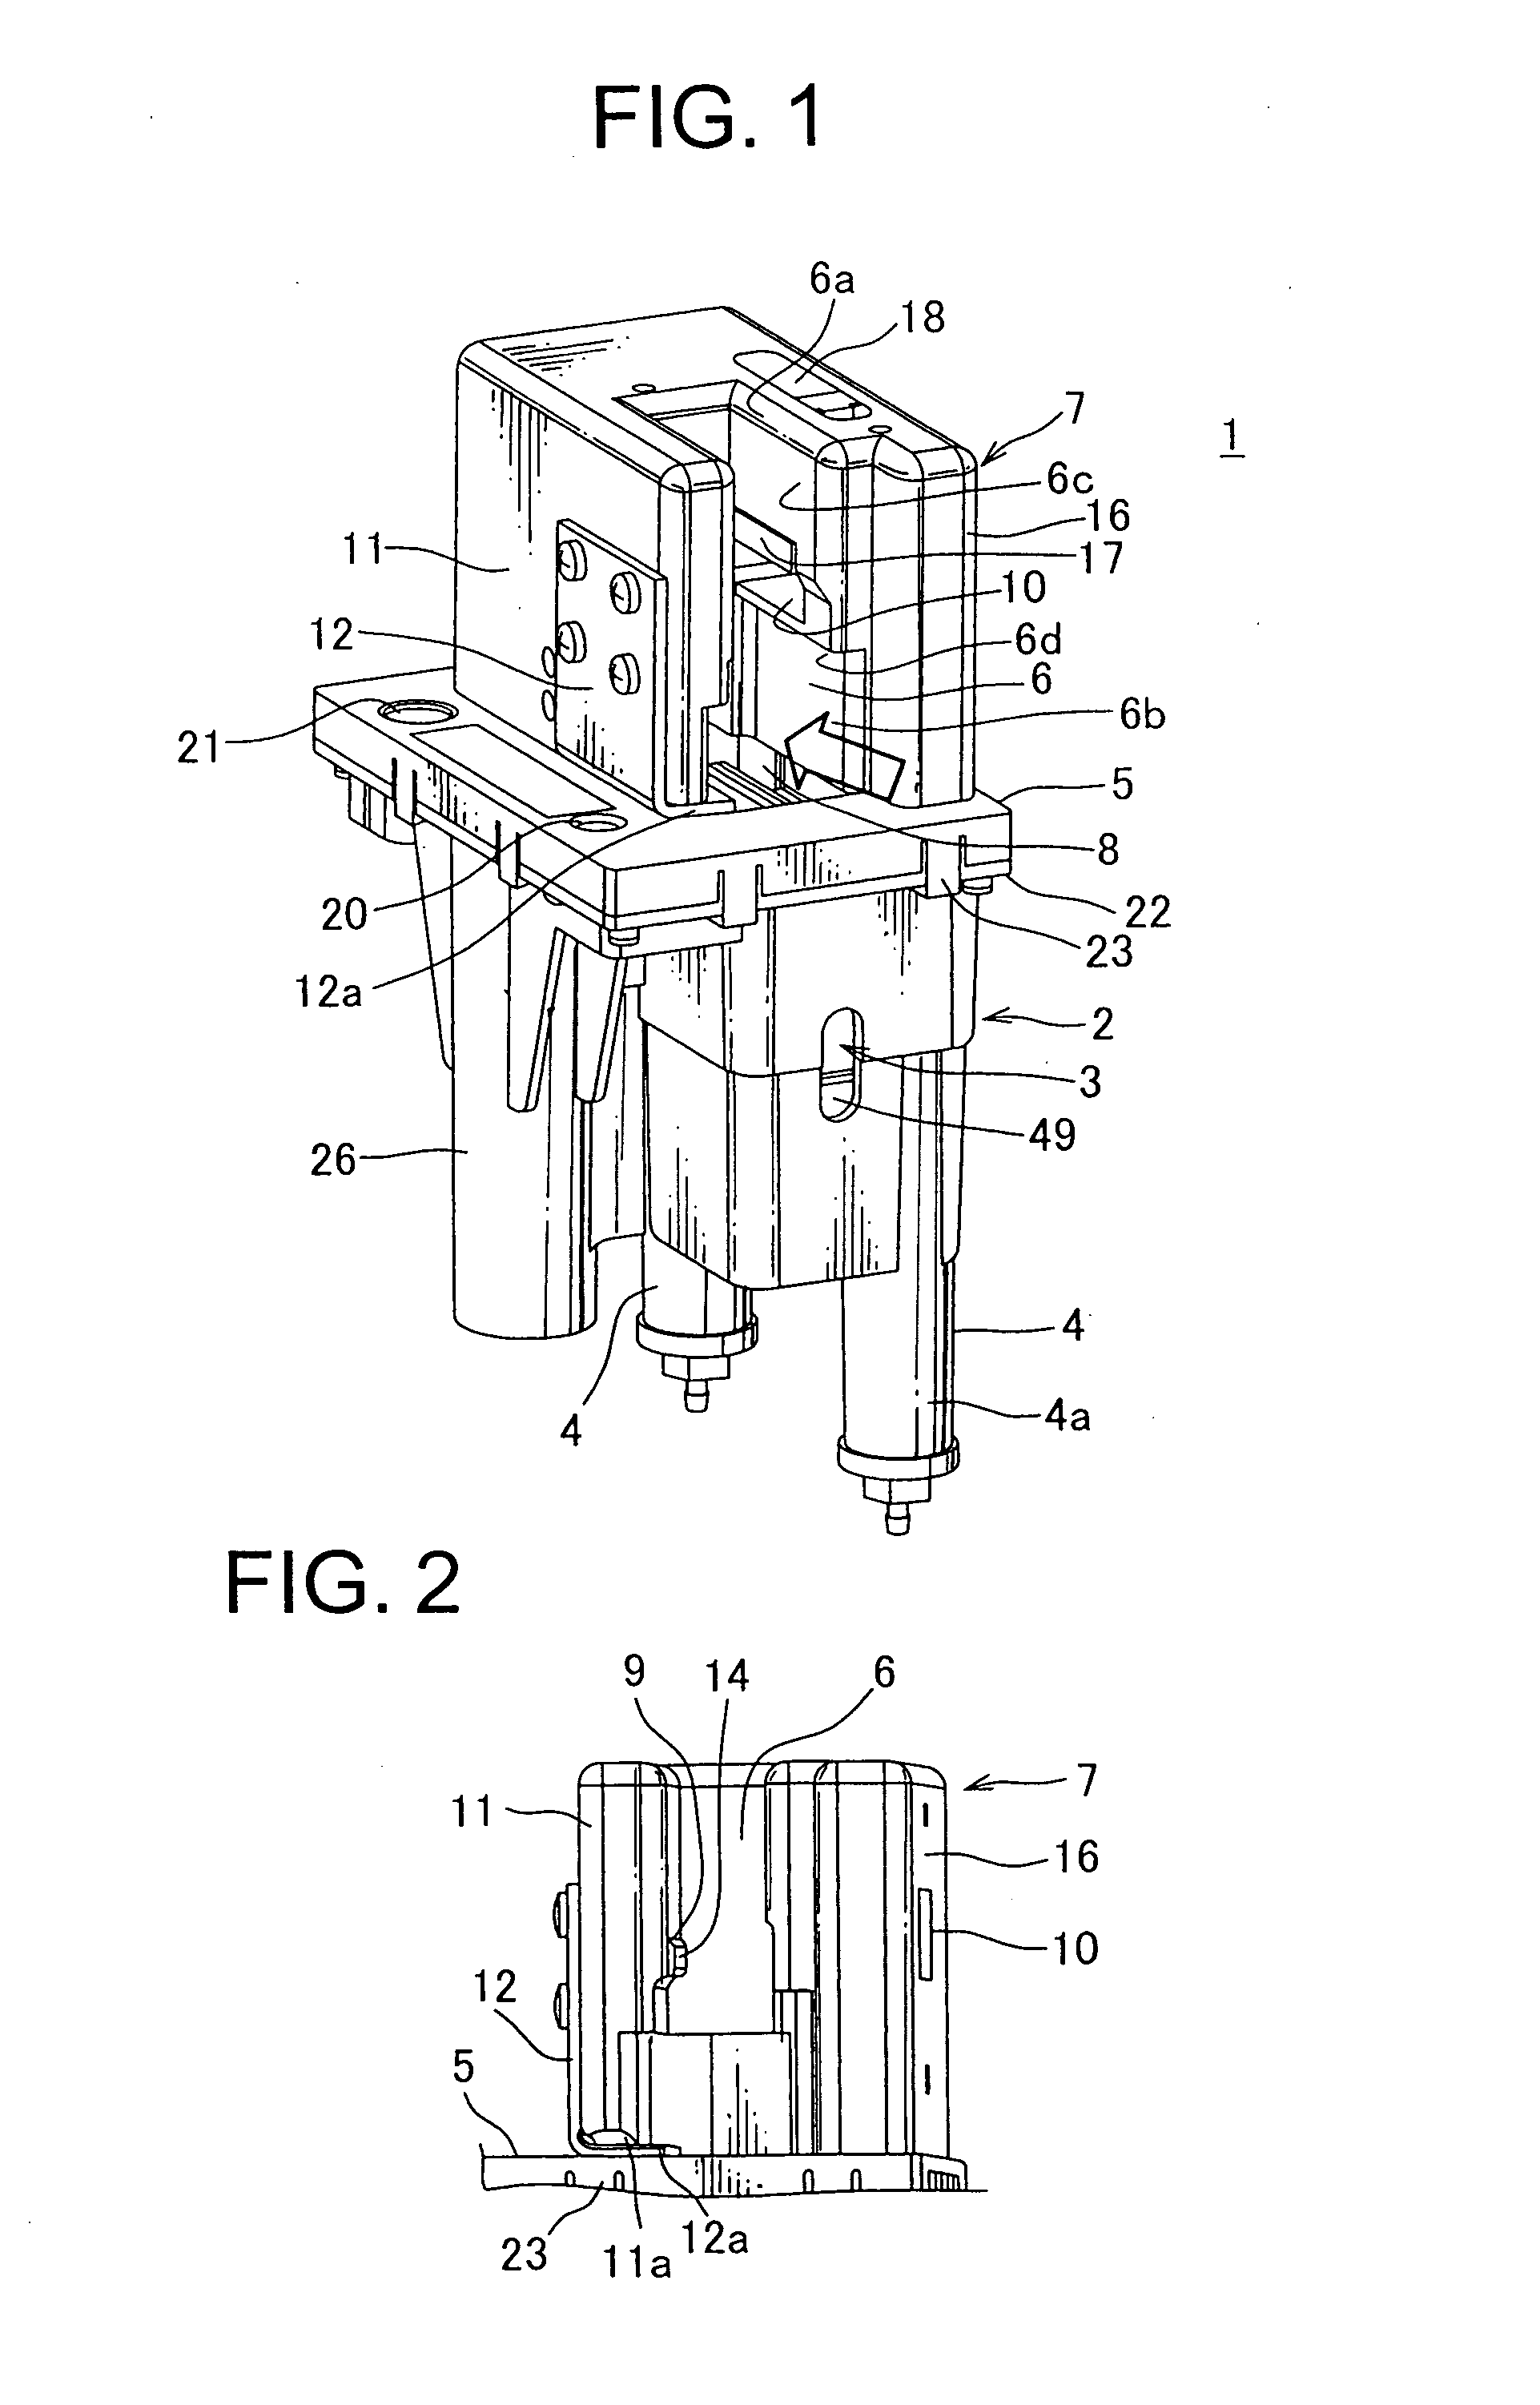 Continuity testing device